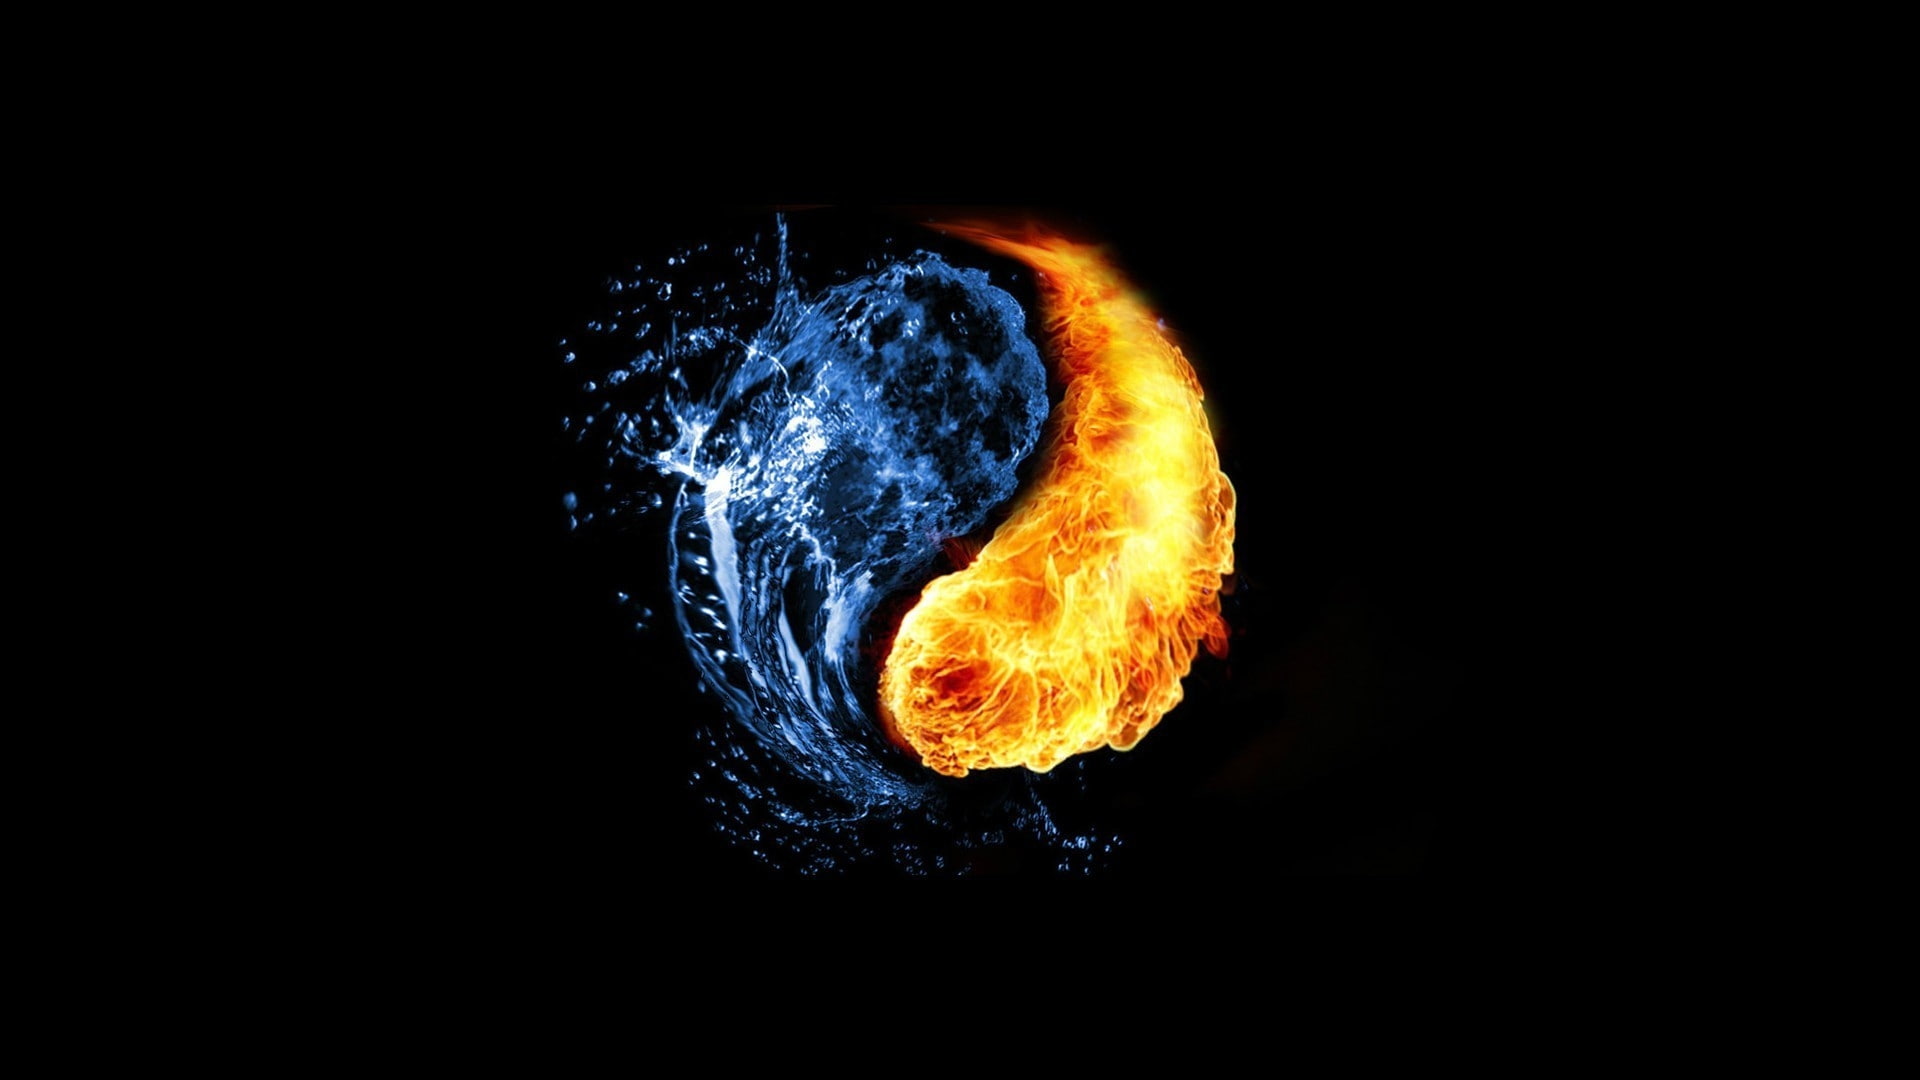 water abstract fire ying yang photo manipulation black background 1920x1080  Nature Water HD Art